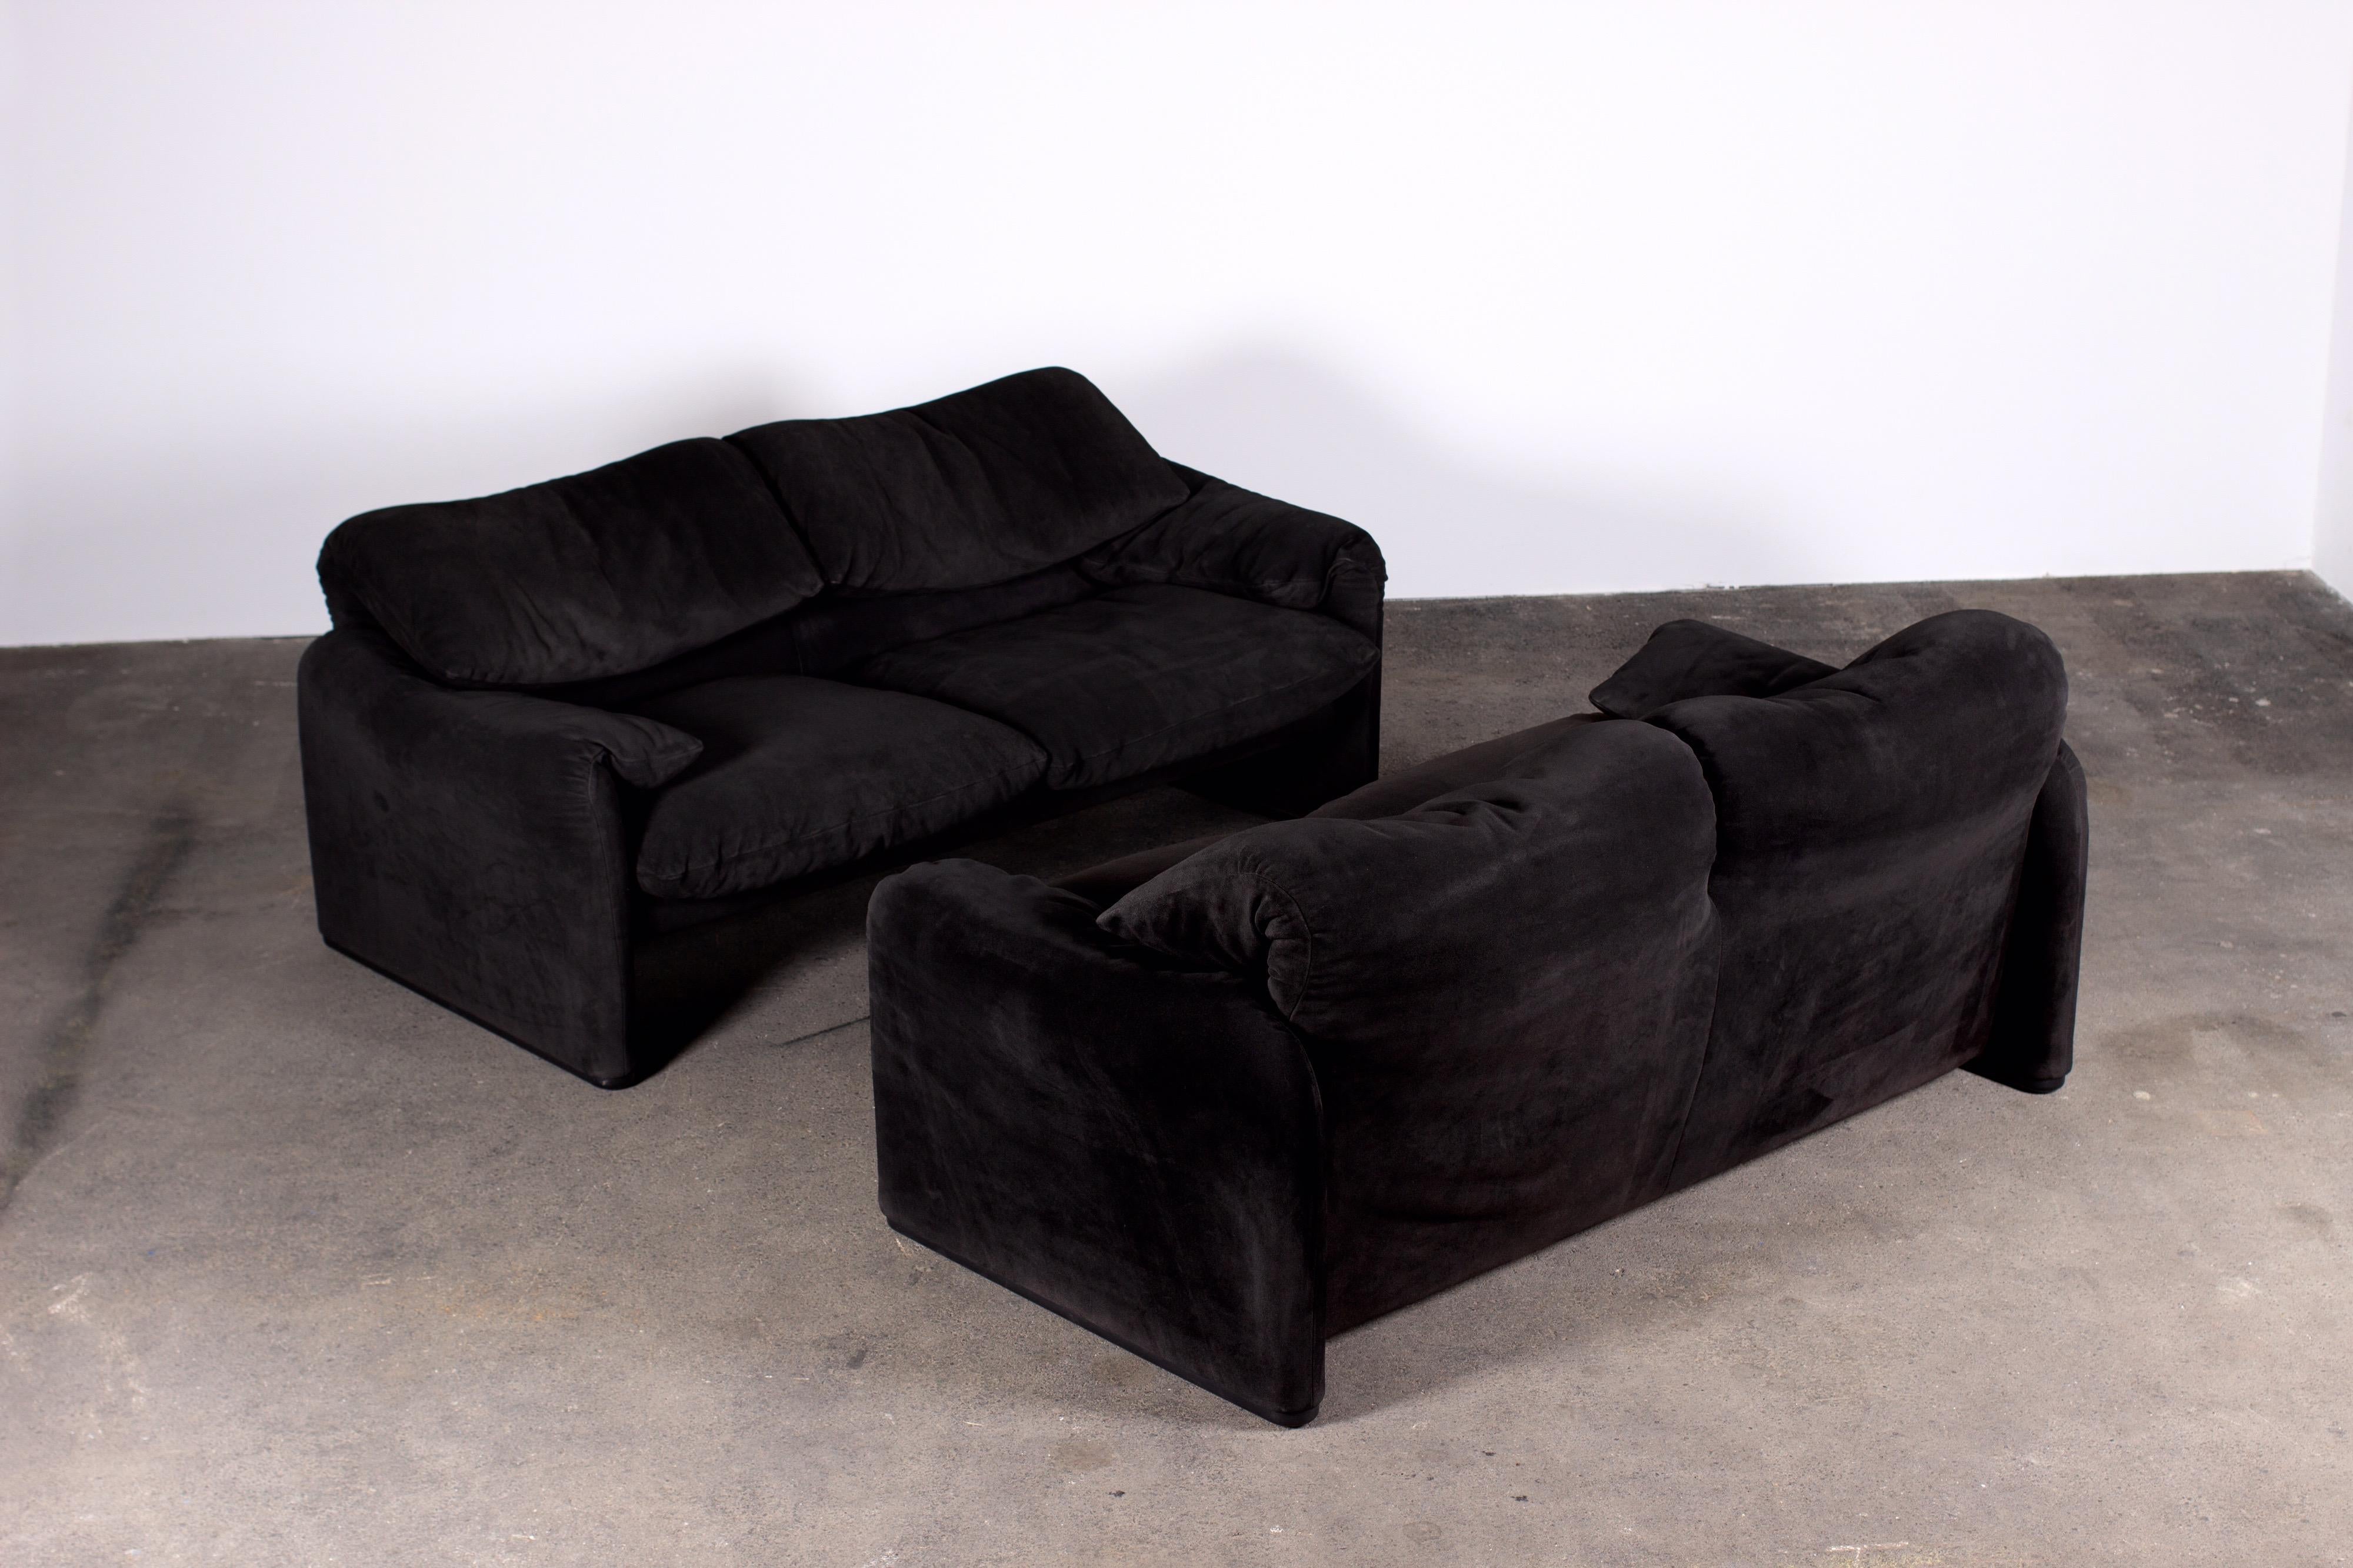 Pair of Black Suede 2-Seater Maralunga Sofas by Vico Magistretti for Cassina 1